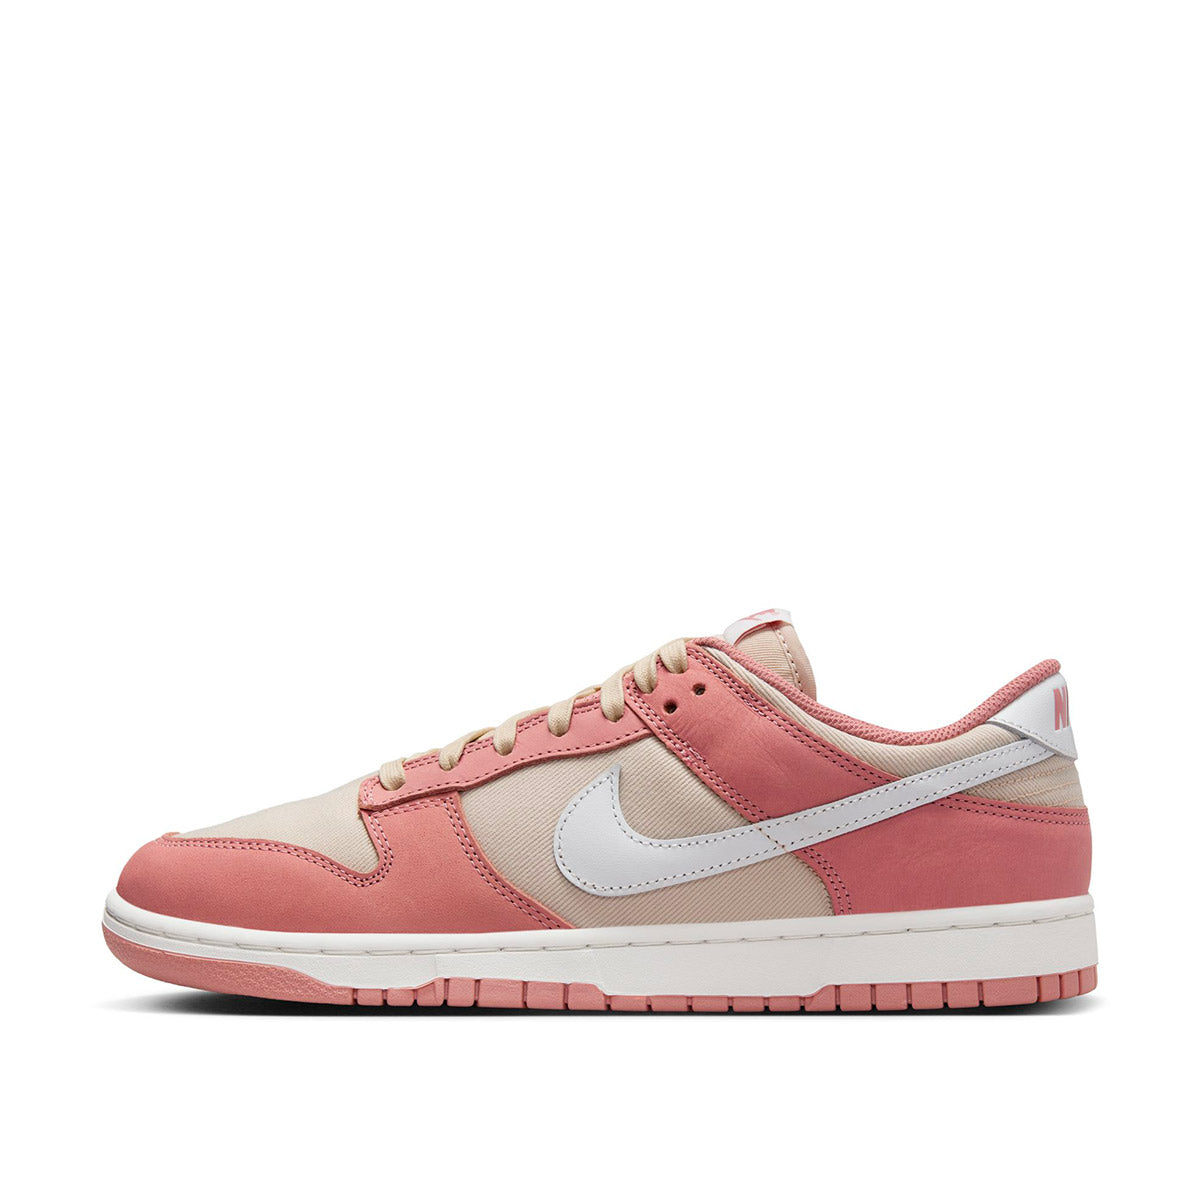 Dunk Low Retro Nbhd "RED STARDUST"